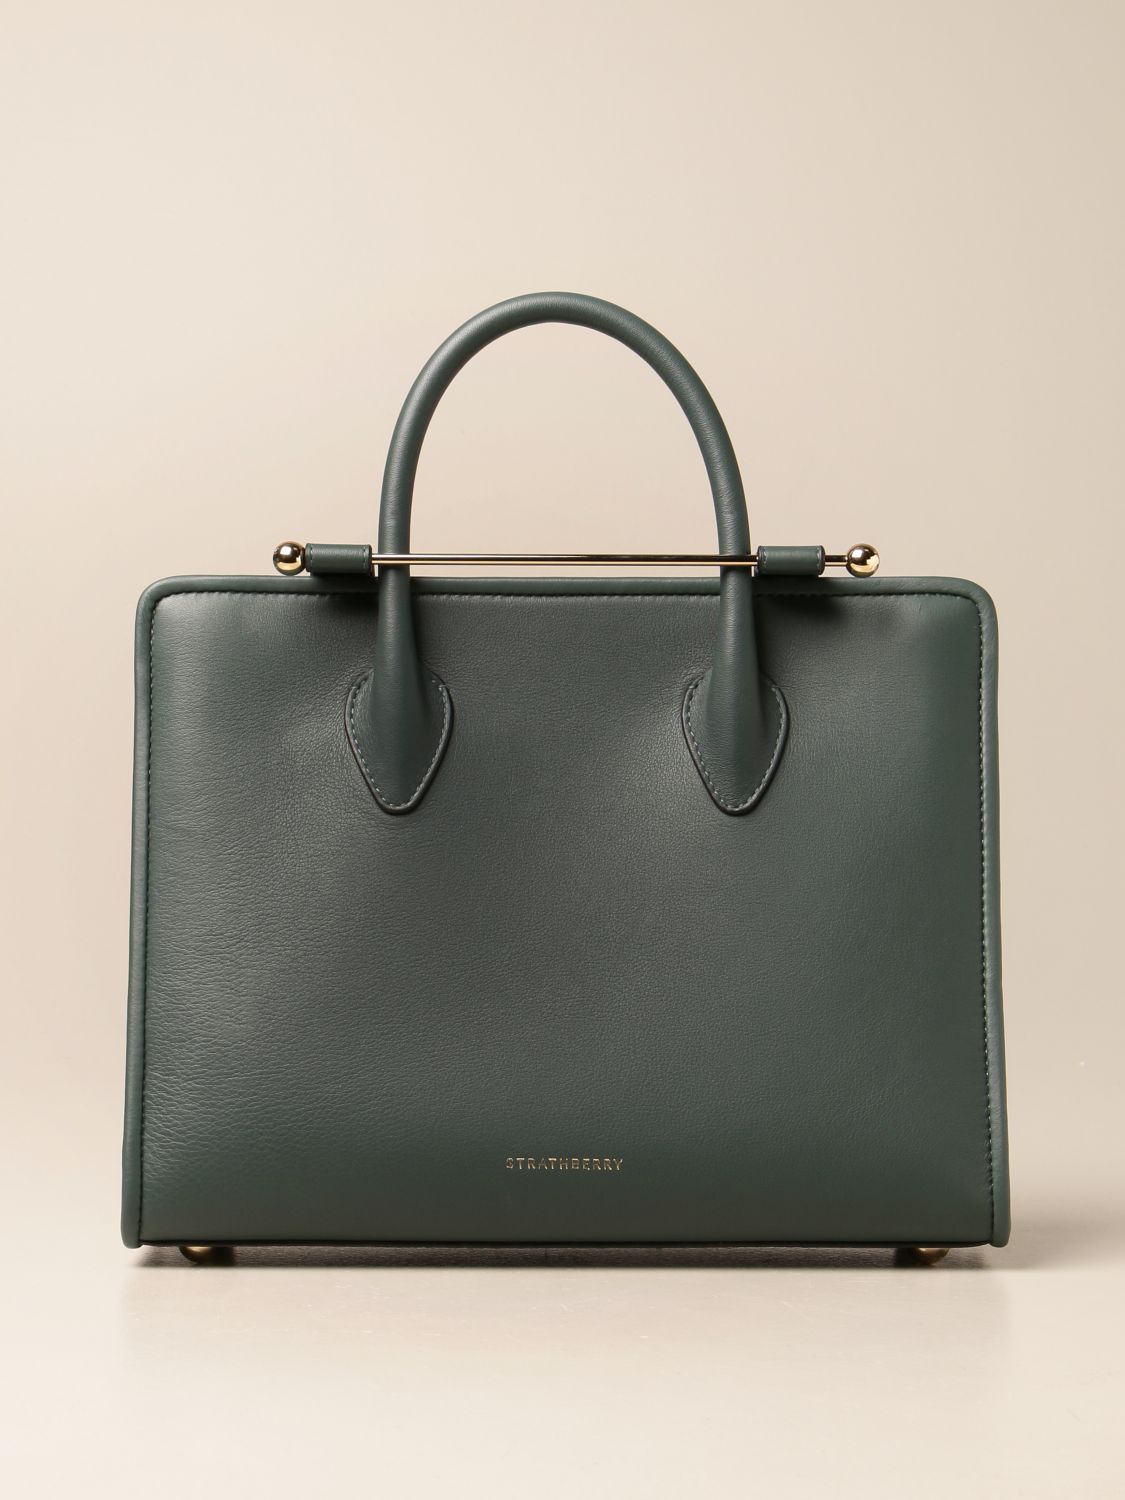 STRATHBERRY: Midi Tote bag in leather - Bottle Green  Strathberry shoulder  bag MIDI TOTE (TS) - W online at